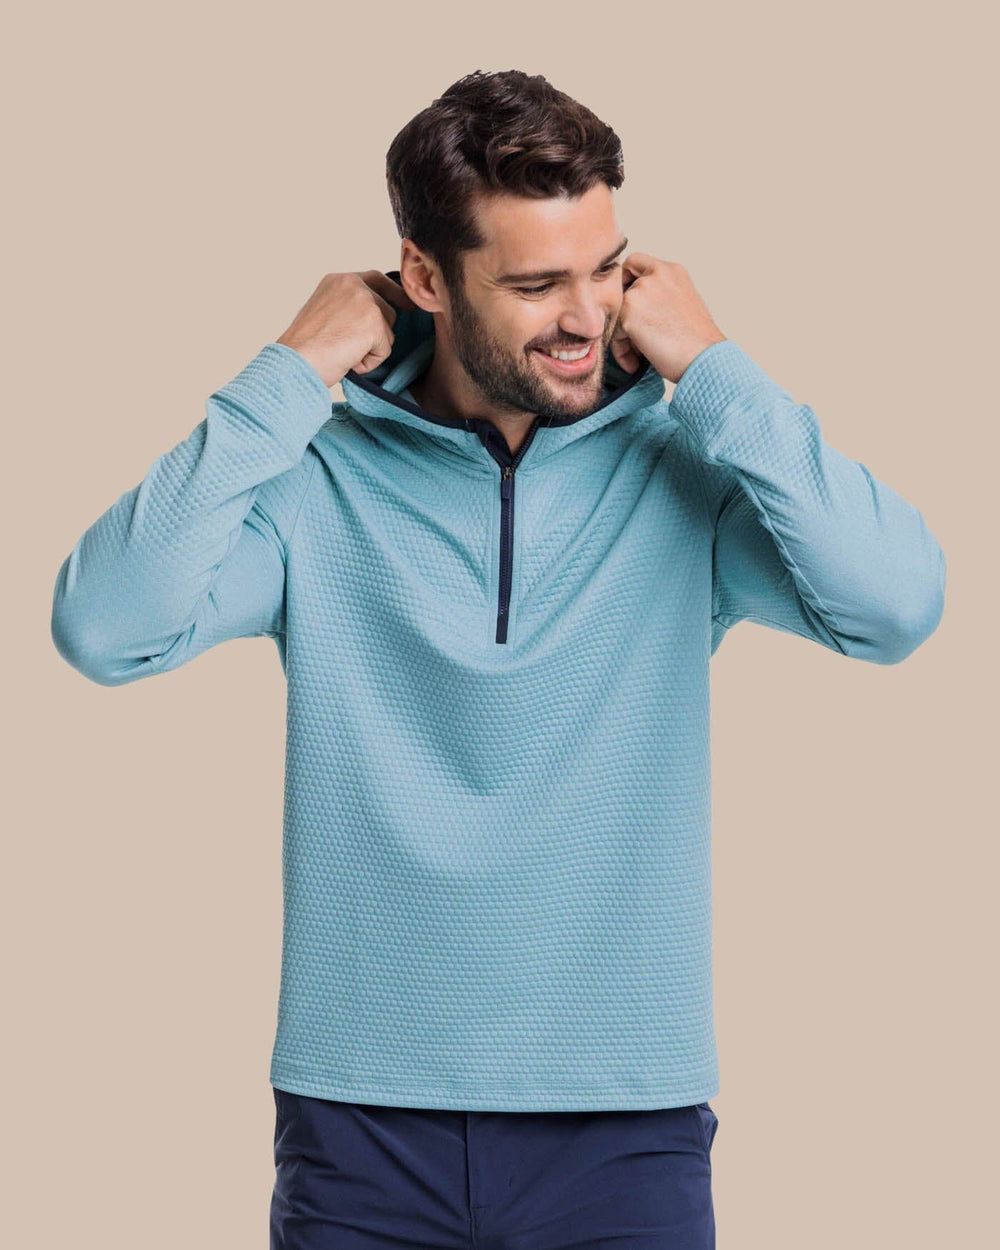 The front view of the Southern Tide Scuttle Heather Performance Quarter Zip Hoodie by Southern Tide - Heather Ocean Teal